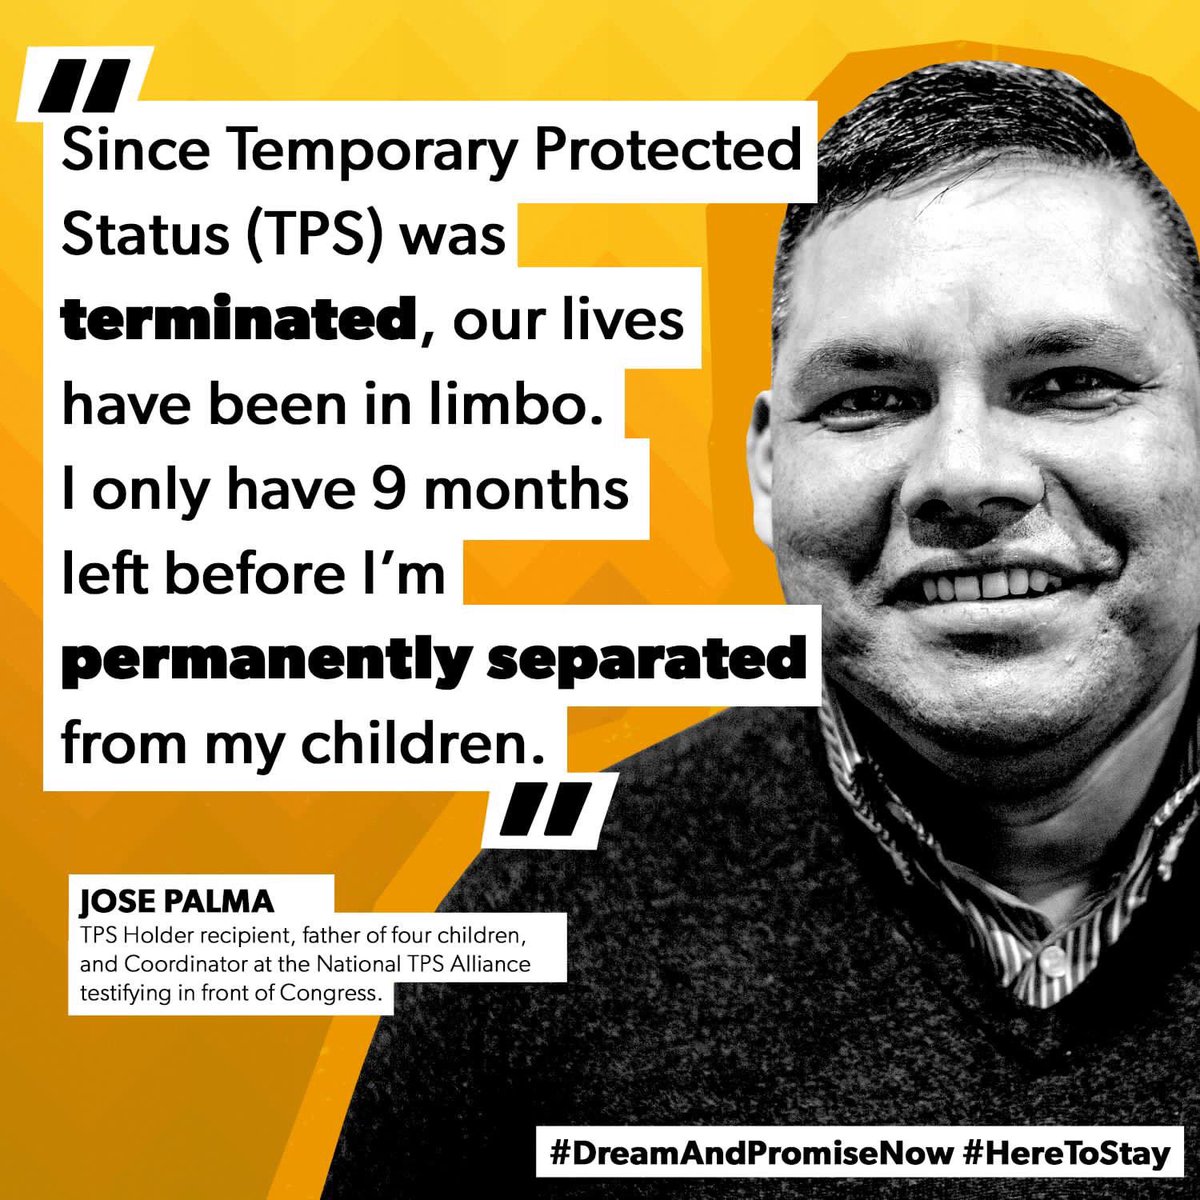 We need permanent protections for Dreamers, TPS families & DED communities! The urgency is real and no action means deportation! ☎️CALL CONGRESS NOW!!!!!!!!210-852-2542 
#DreamAndPromiseNow #HereToStay #ProtectTheDream #ResidencyNow #TPSJustice